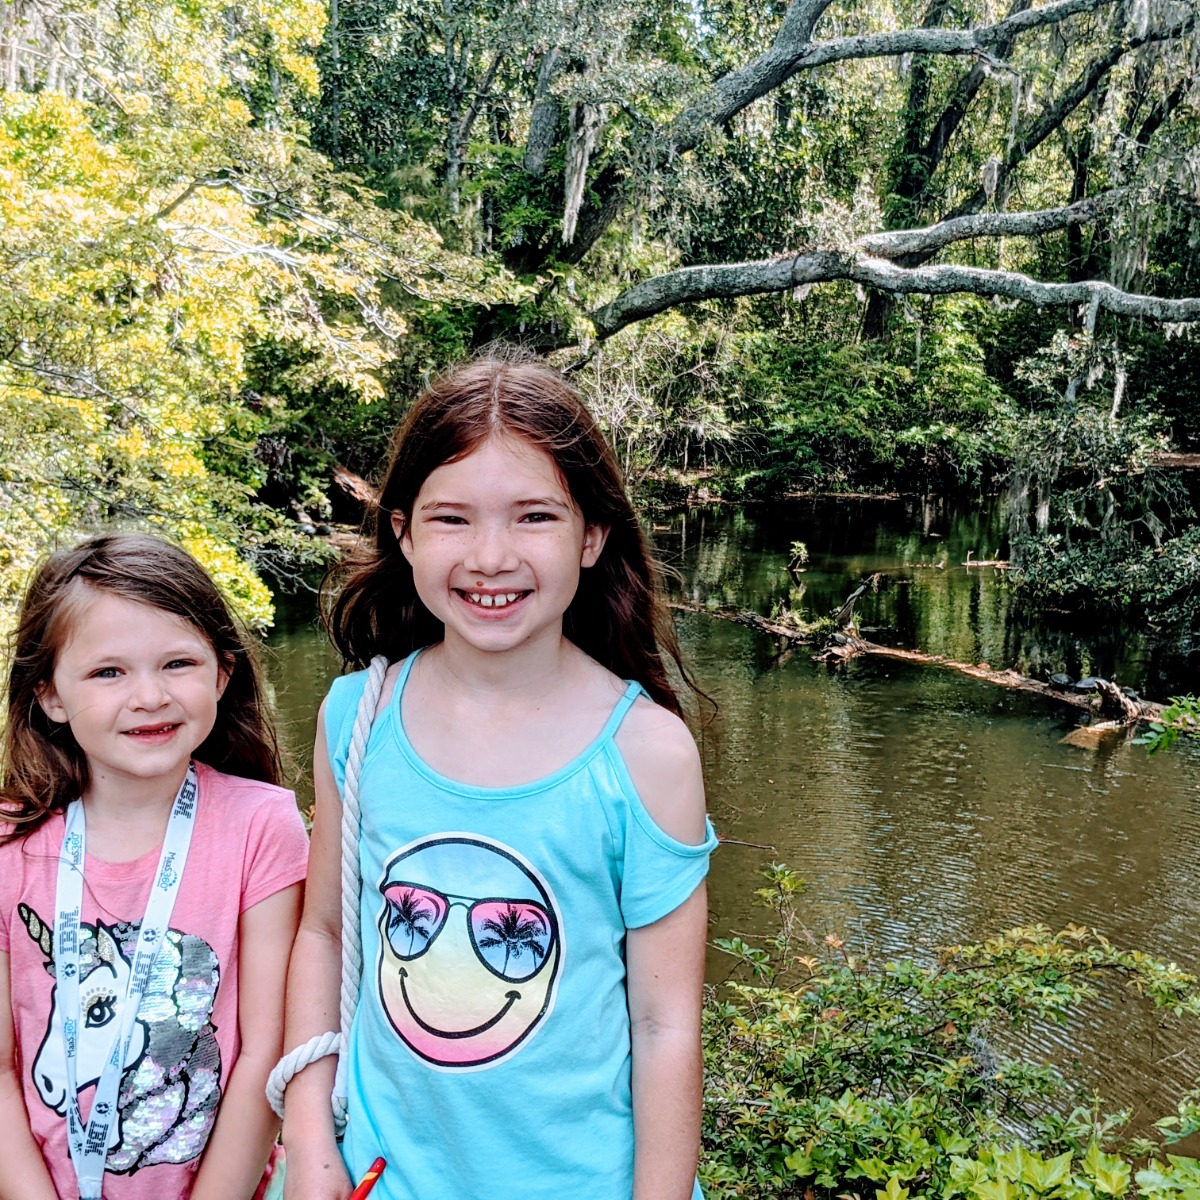 Iconic Turtles on a Log at Airlie Gardens - great photo op for our daughters!